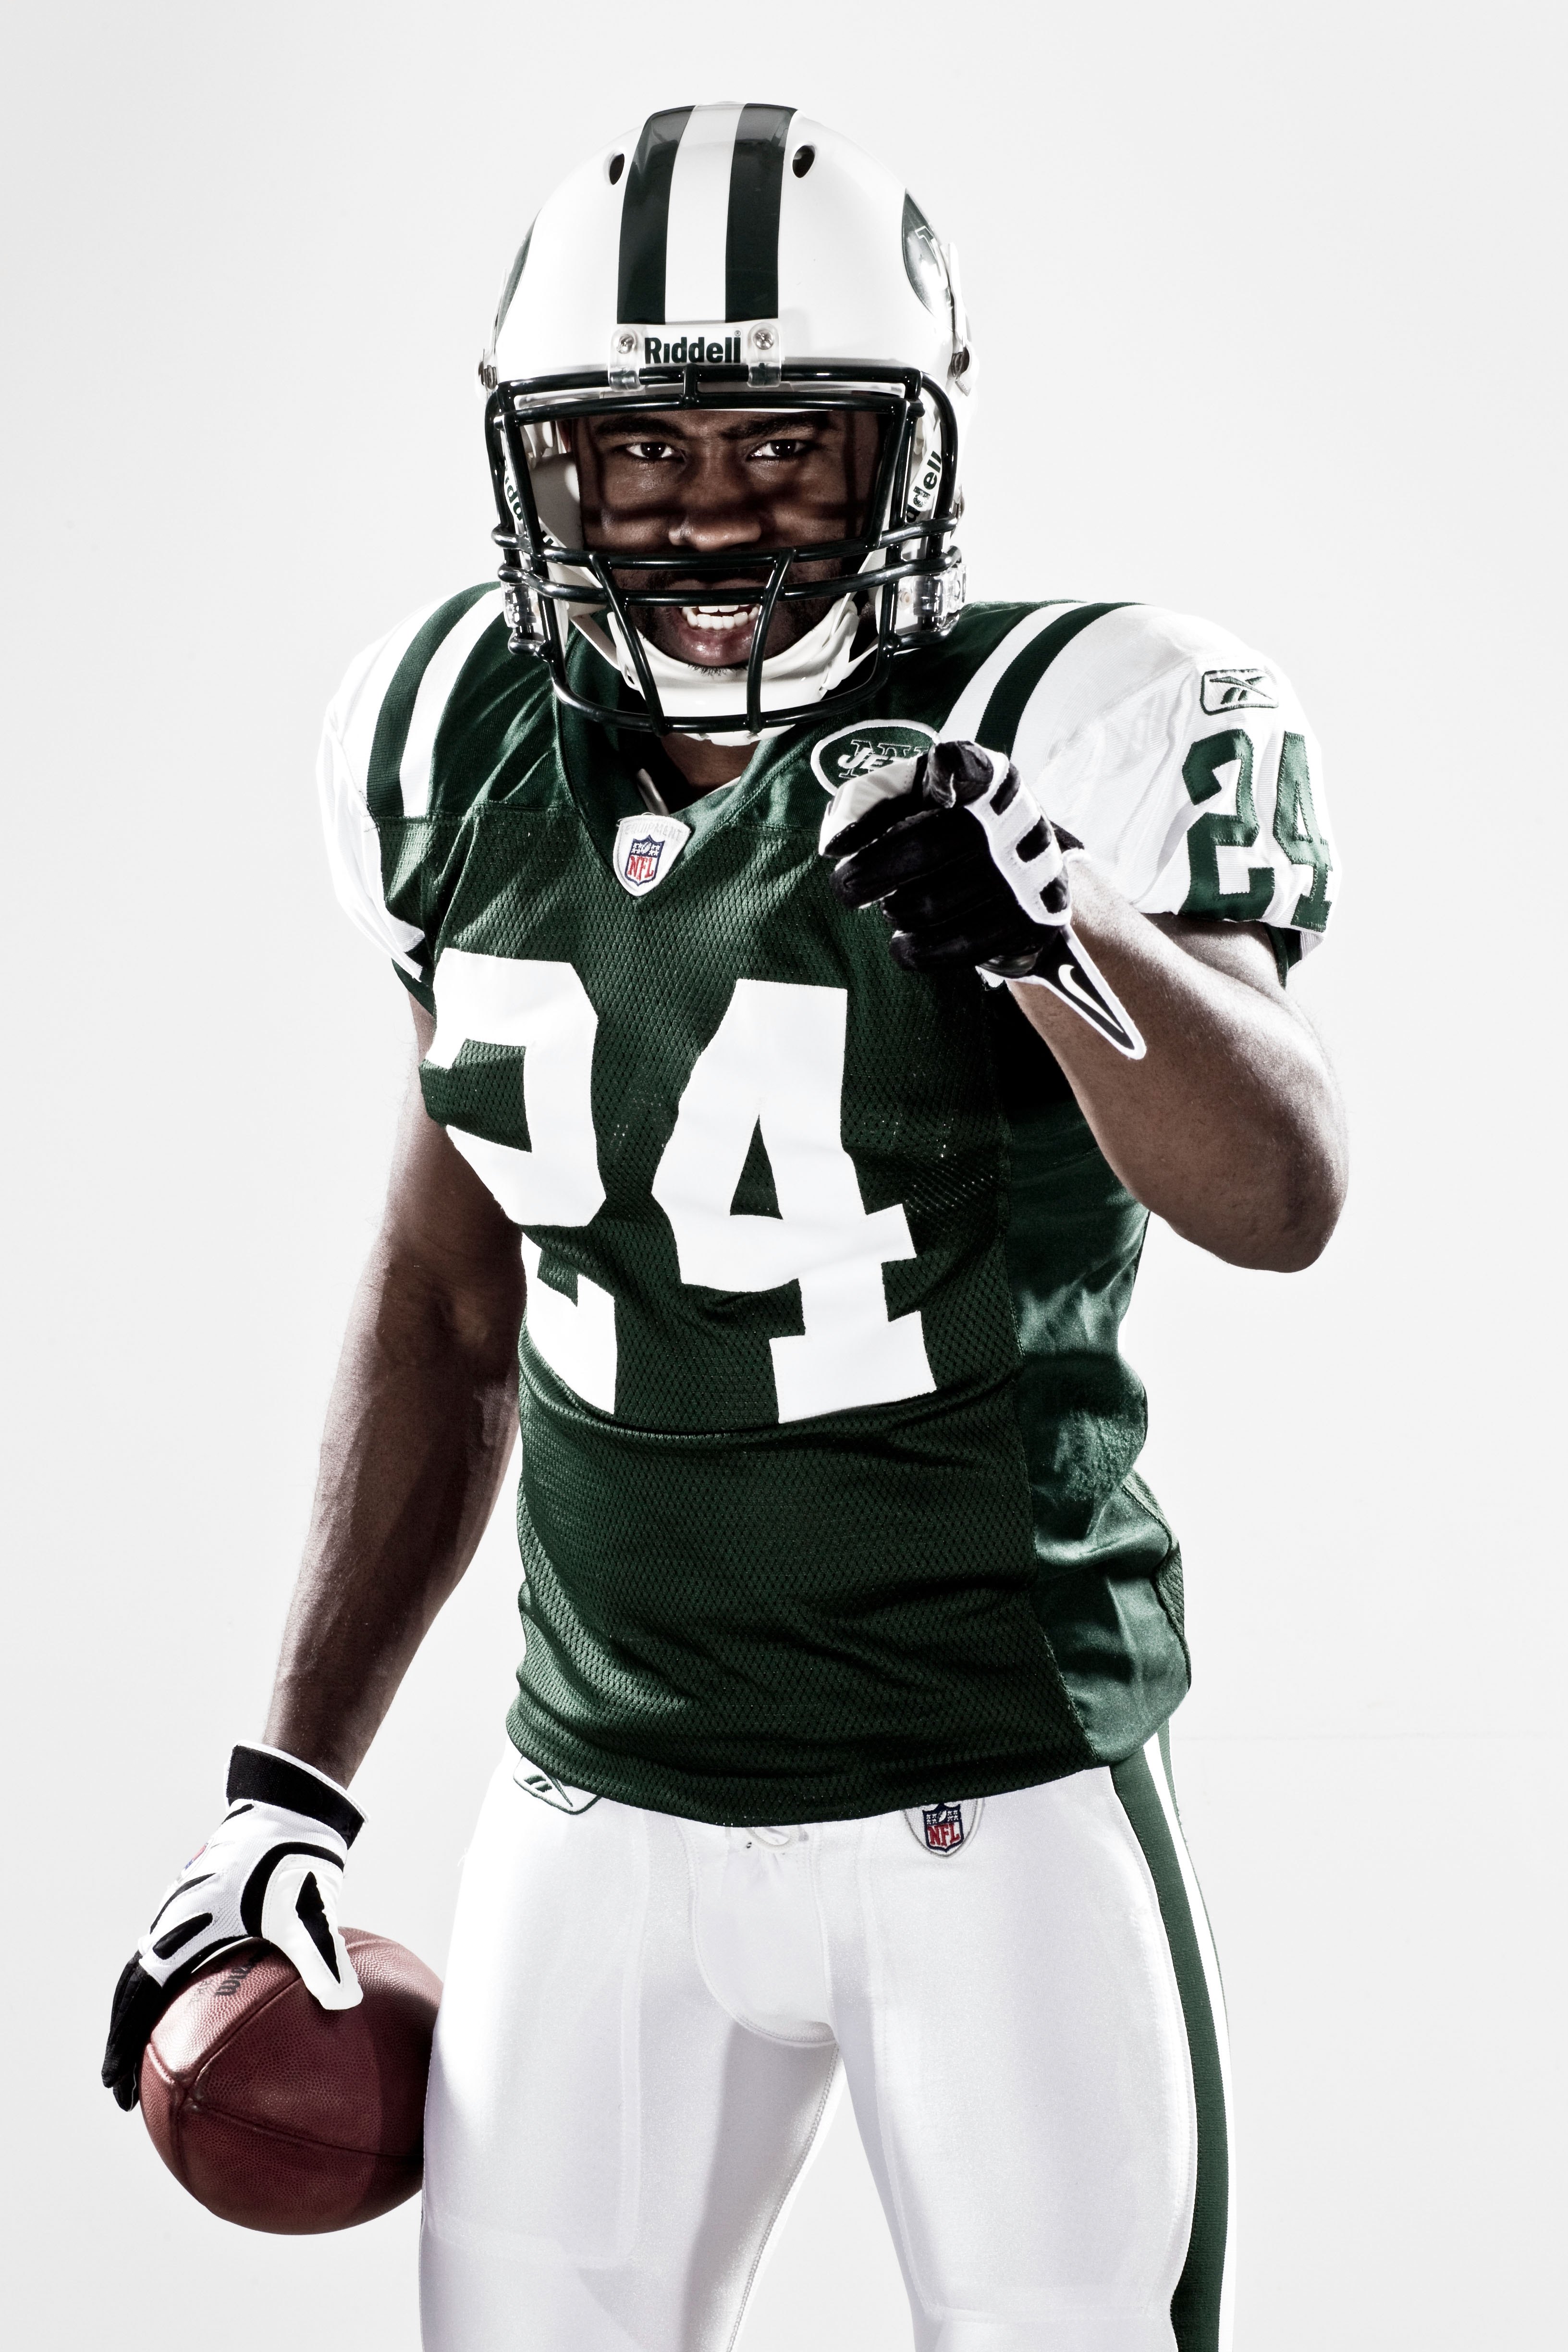 NEW YORK - MARCH 16:  New York Jets Darrelle Revis poses for a portrait on March 16, 2010 in New York, New York.  (Photo by Chris McGrath/Getty Images)